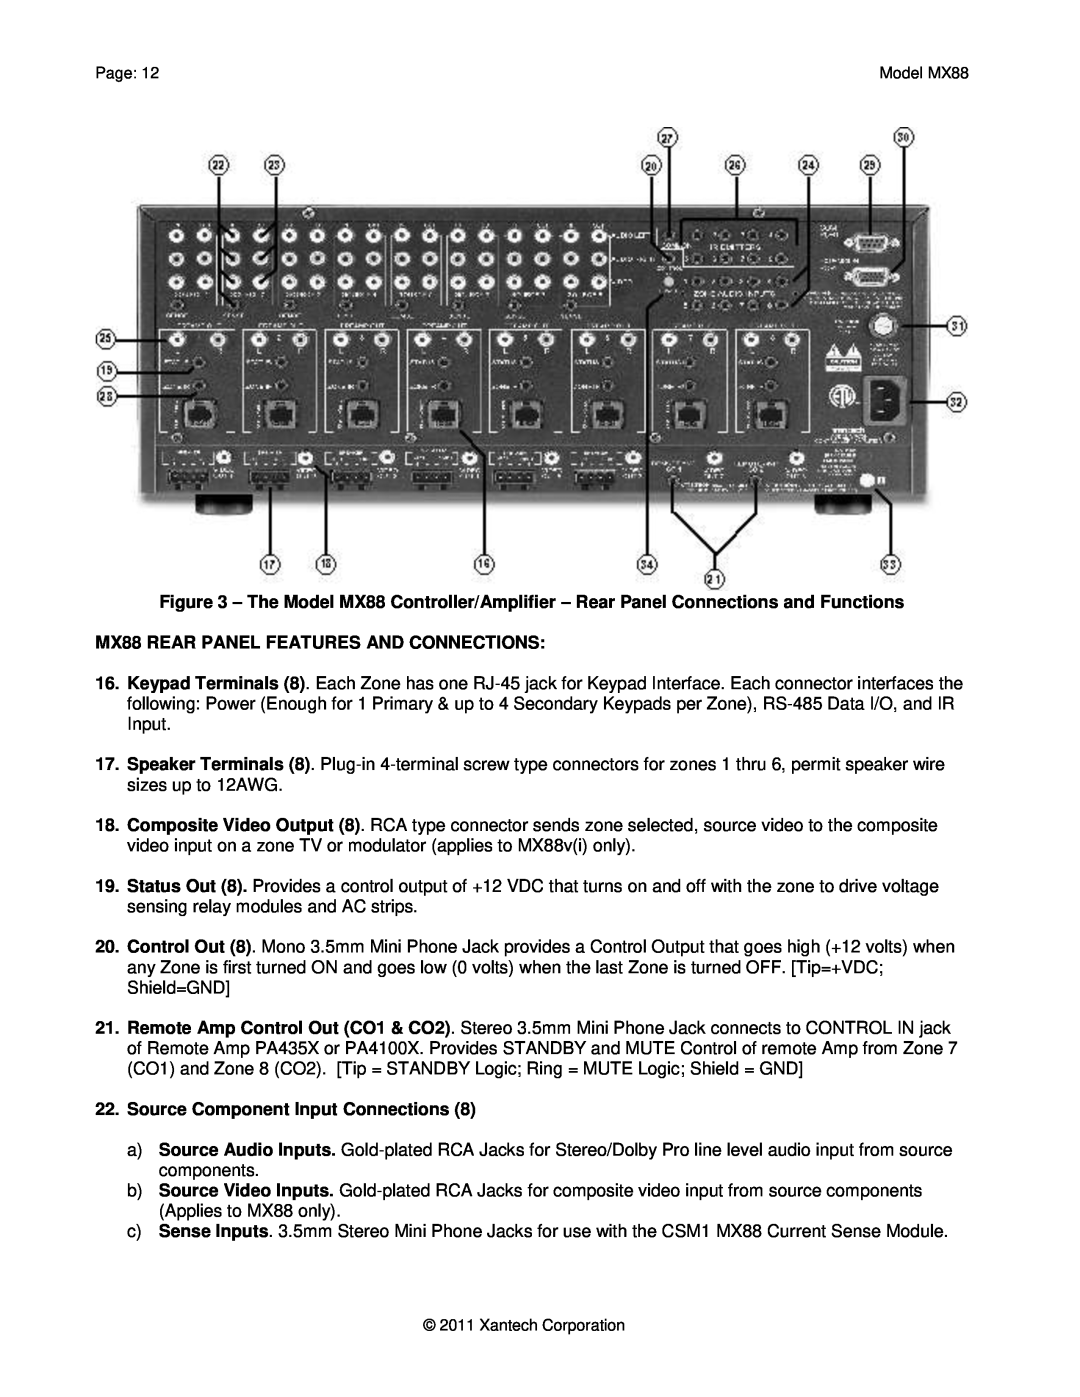 Xantech installation instructions MX88 REAR PANEL FEATURES AND CONNECTIONS, Source Component Input Connections 